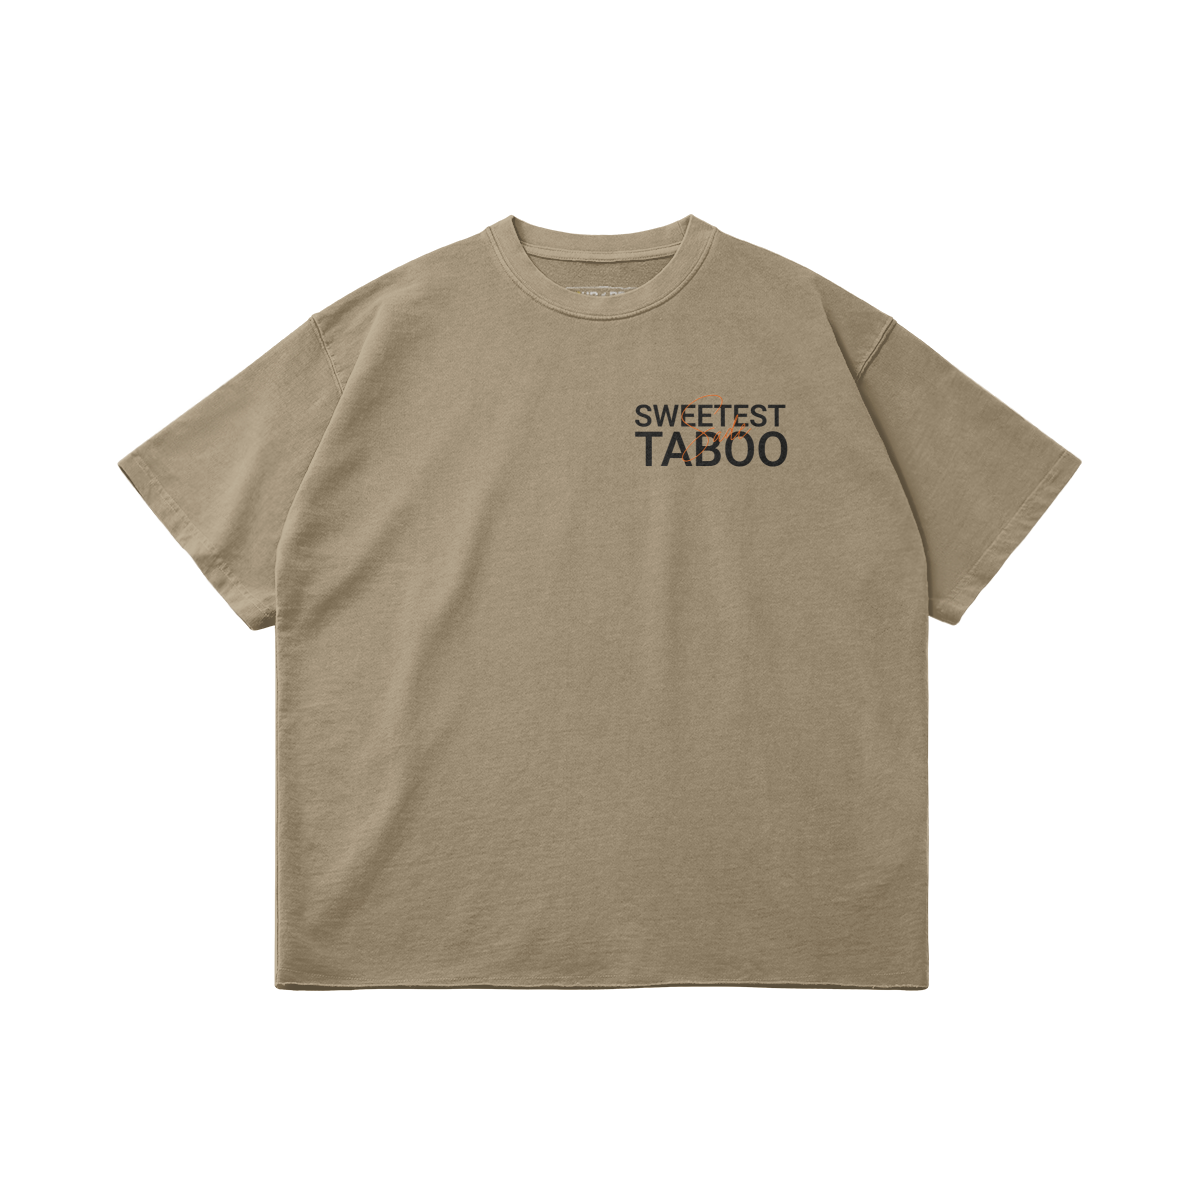 The Sweetest Taboo Oversized T-shirt